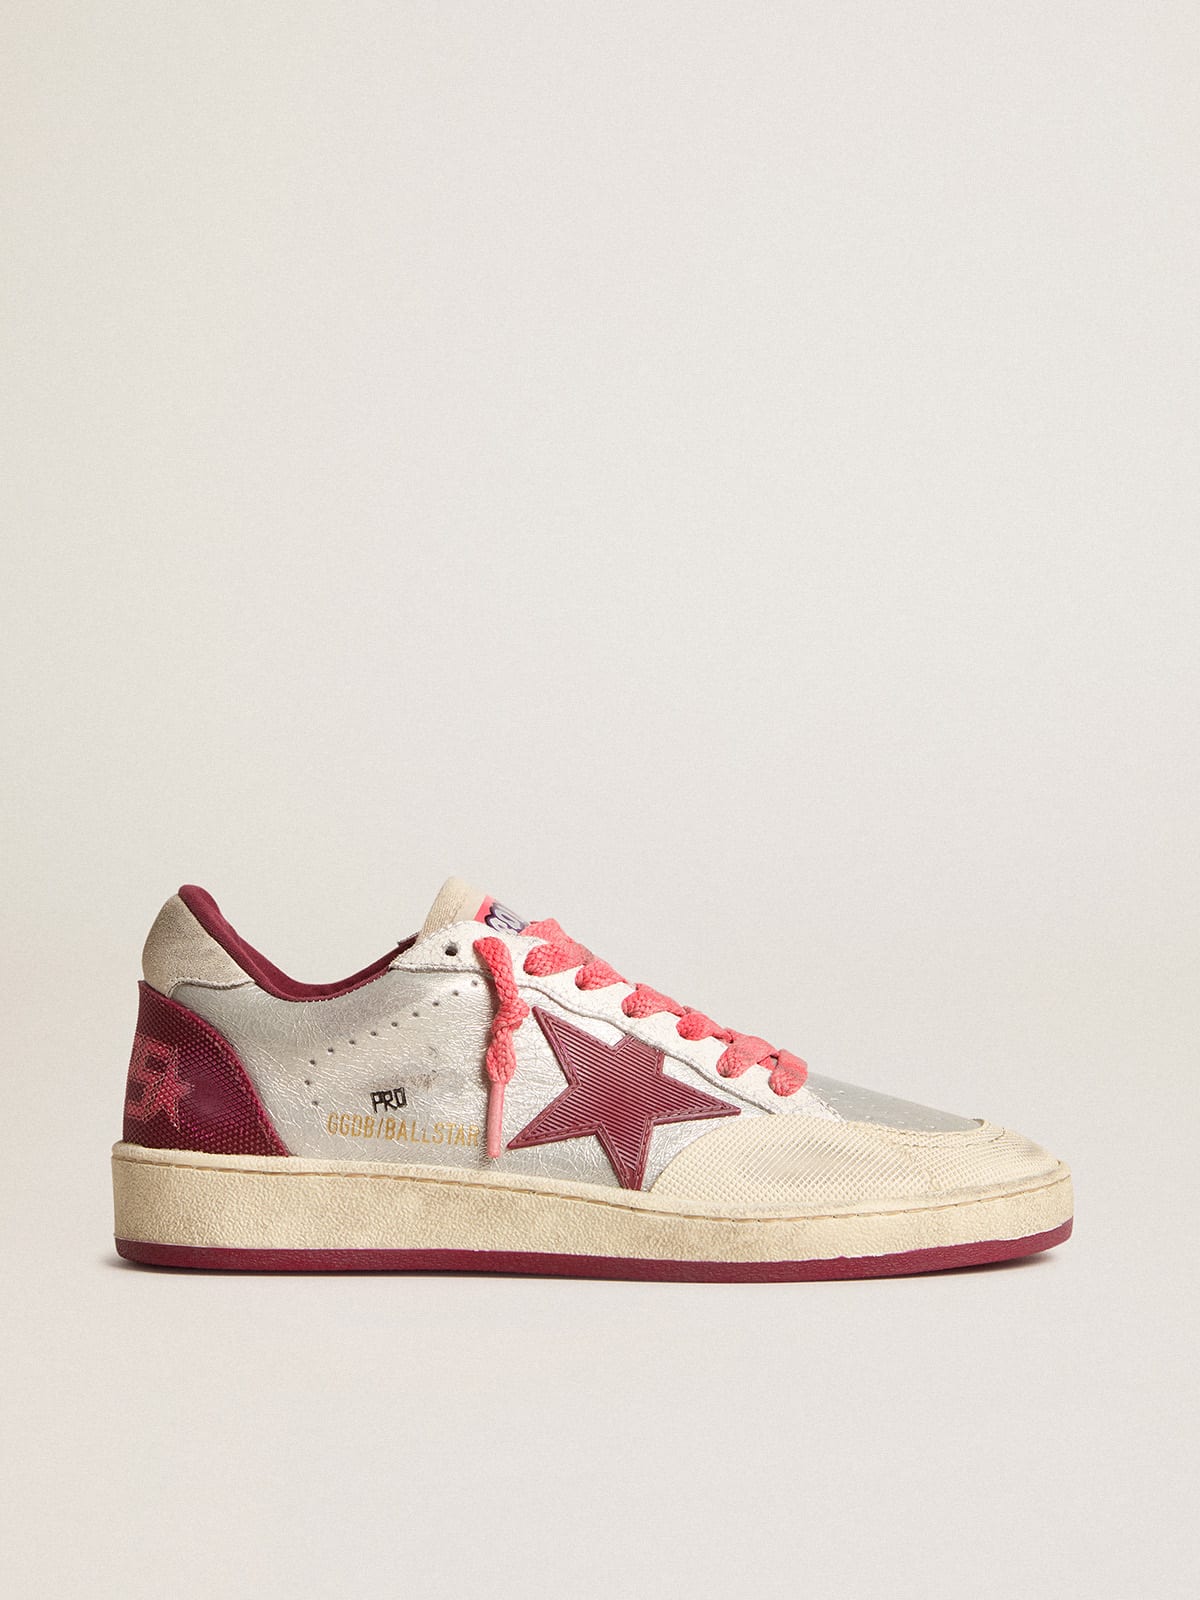 Women’s Ball Star Pro in silver crackle leather with burgundy star